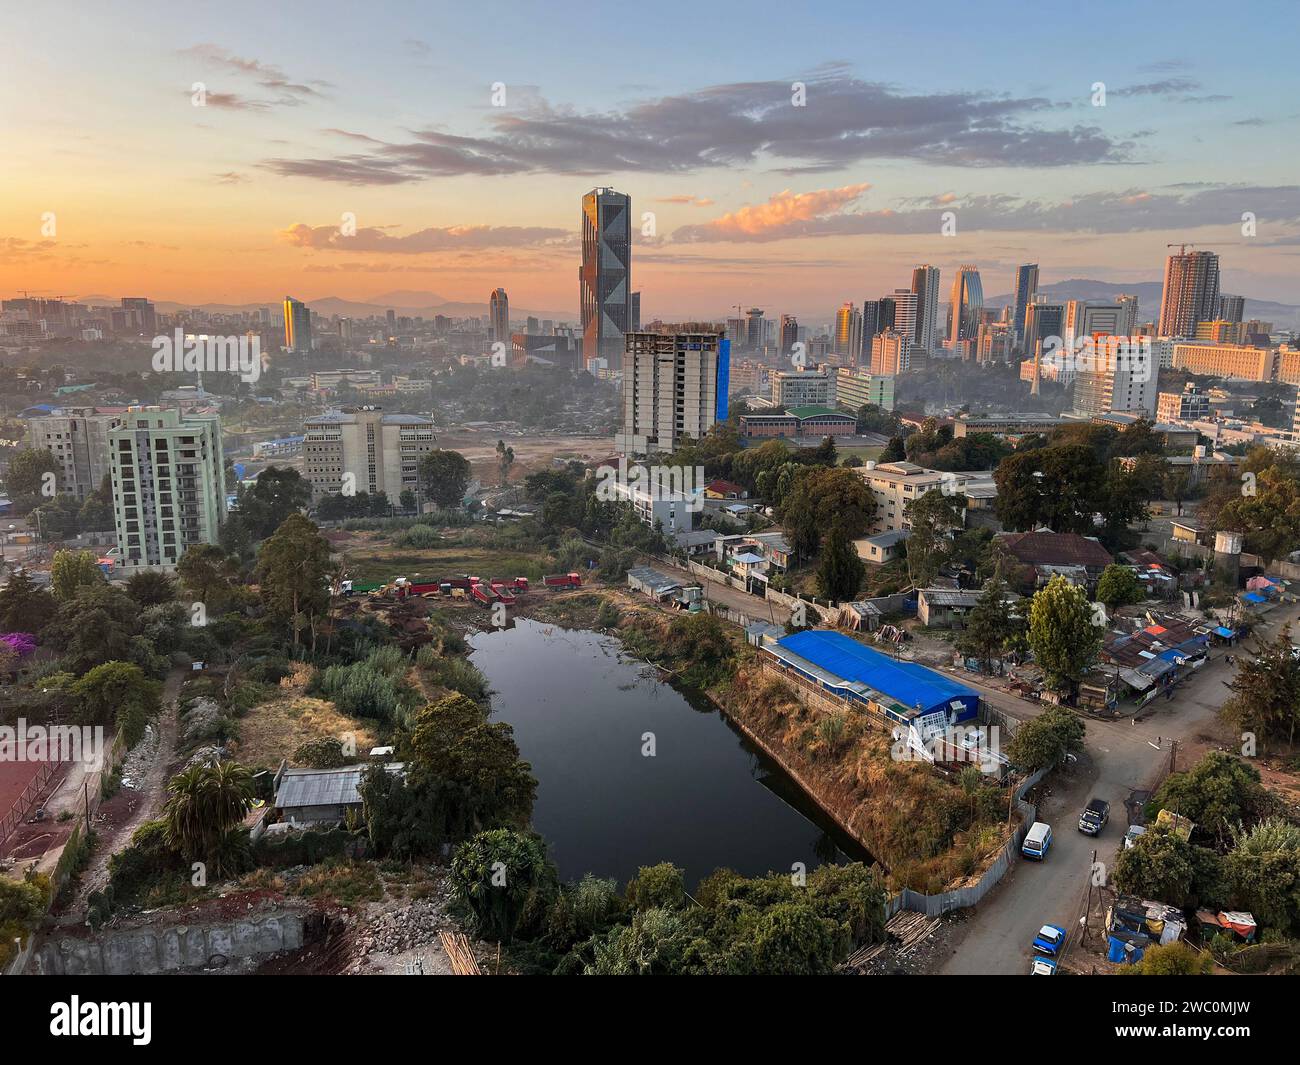 Addis Abeba, Ethiopia - 9 January 2023: Aerial overview of Addis Abeba city, the capital of Ethiopia, showing brand new buildings and construction in Stock Photo